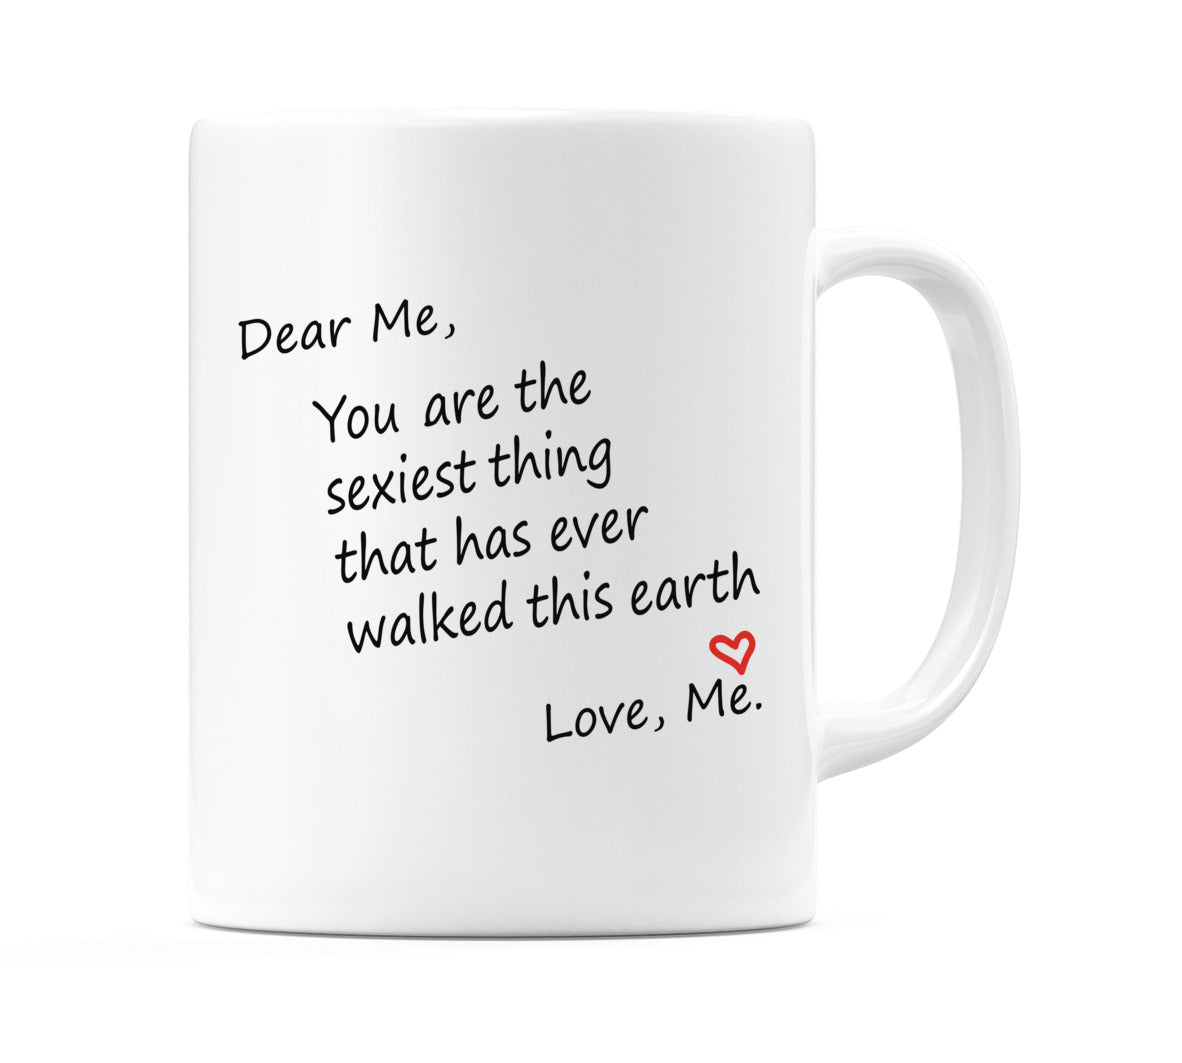 Dear Me, You are the sexiest thing... Mug